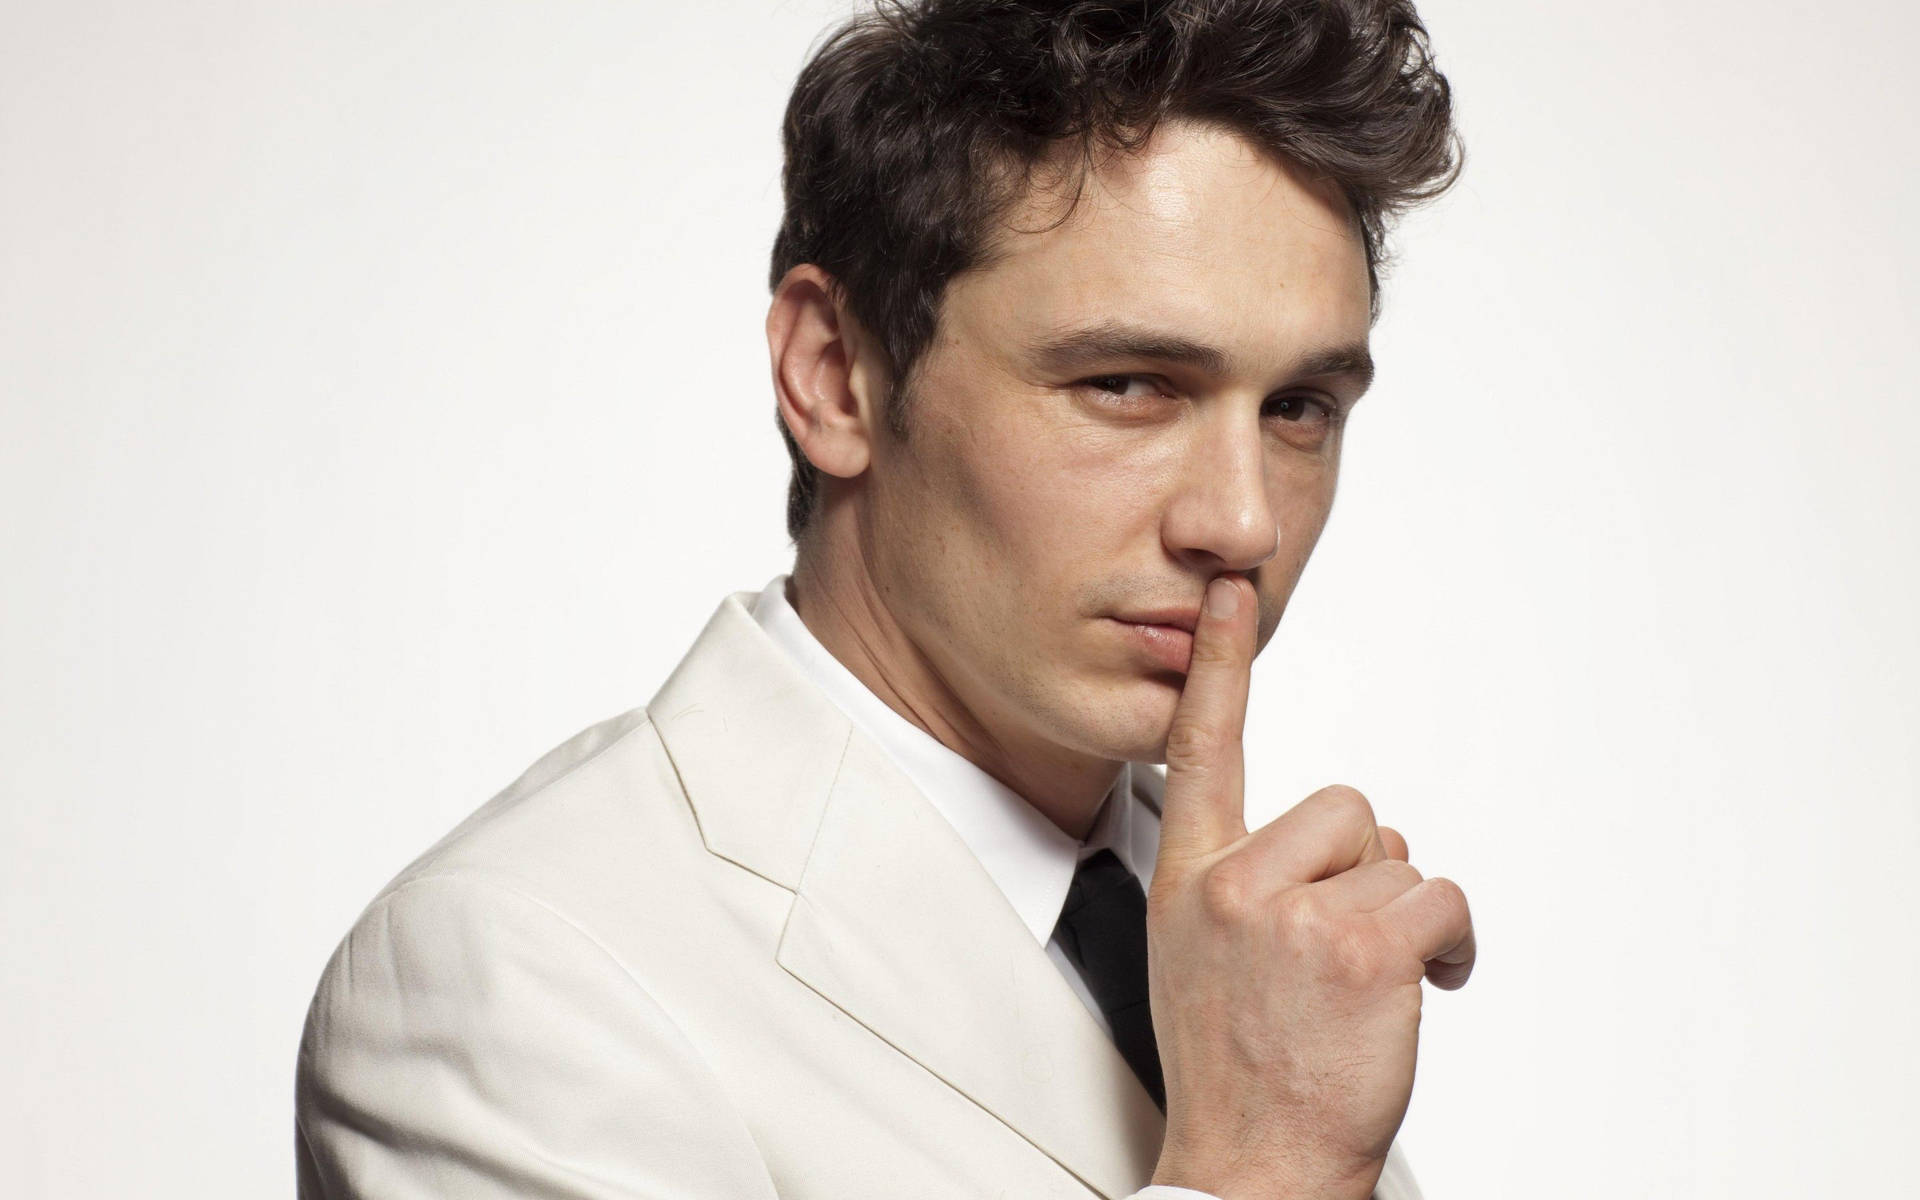 James Franco In White Suit Making A Silence Gesture